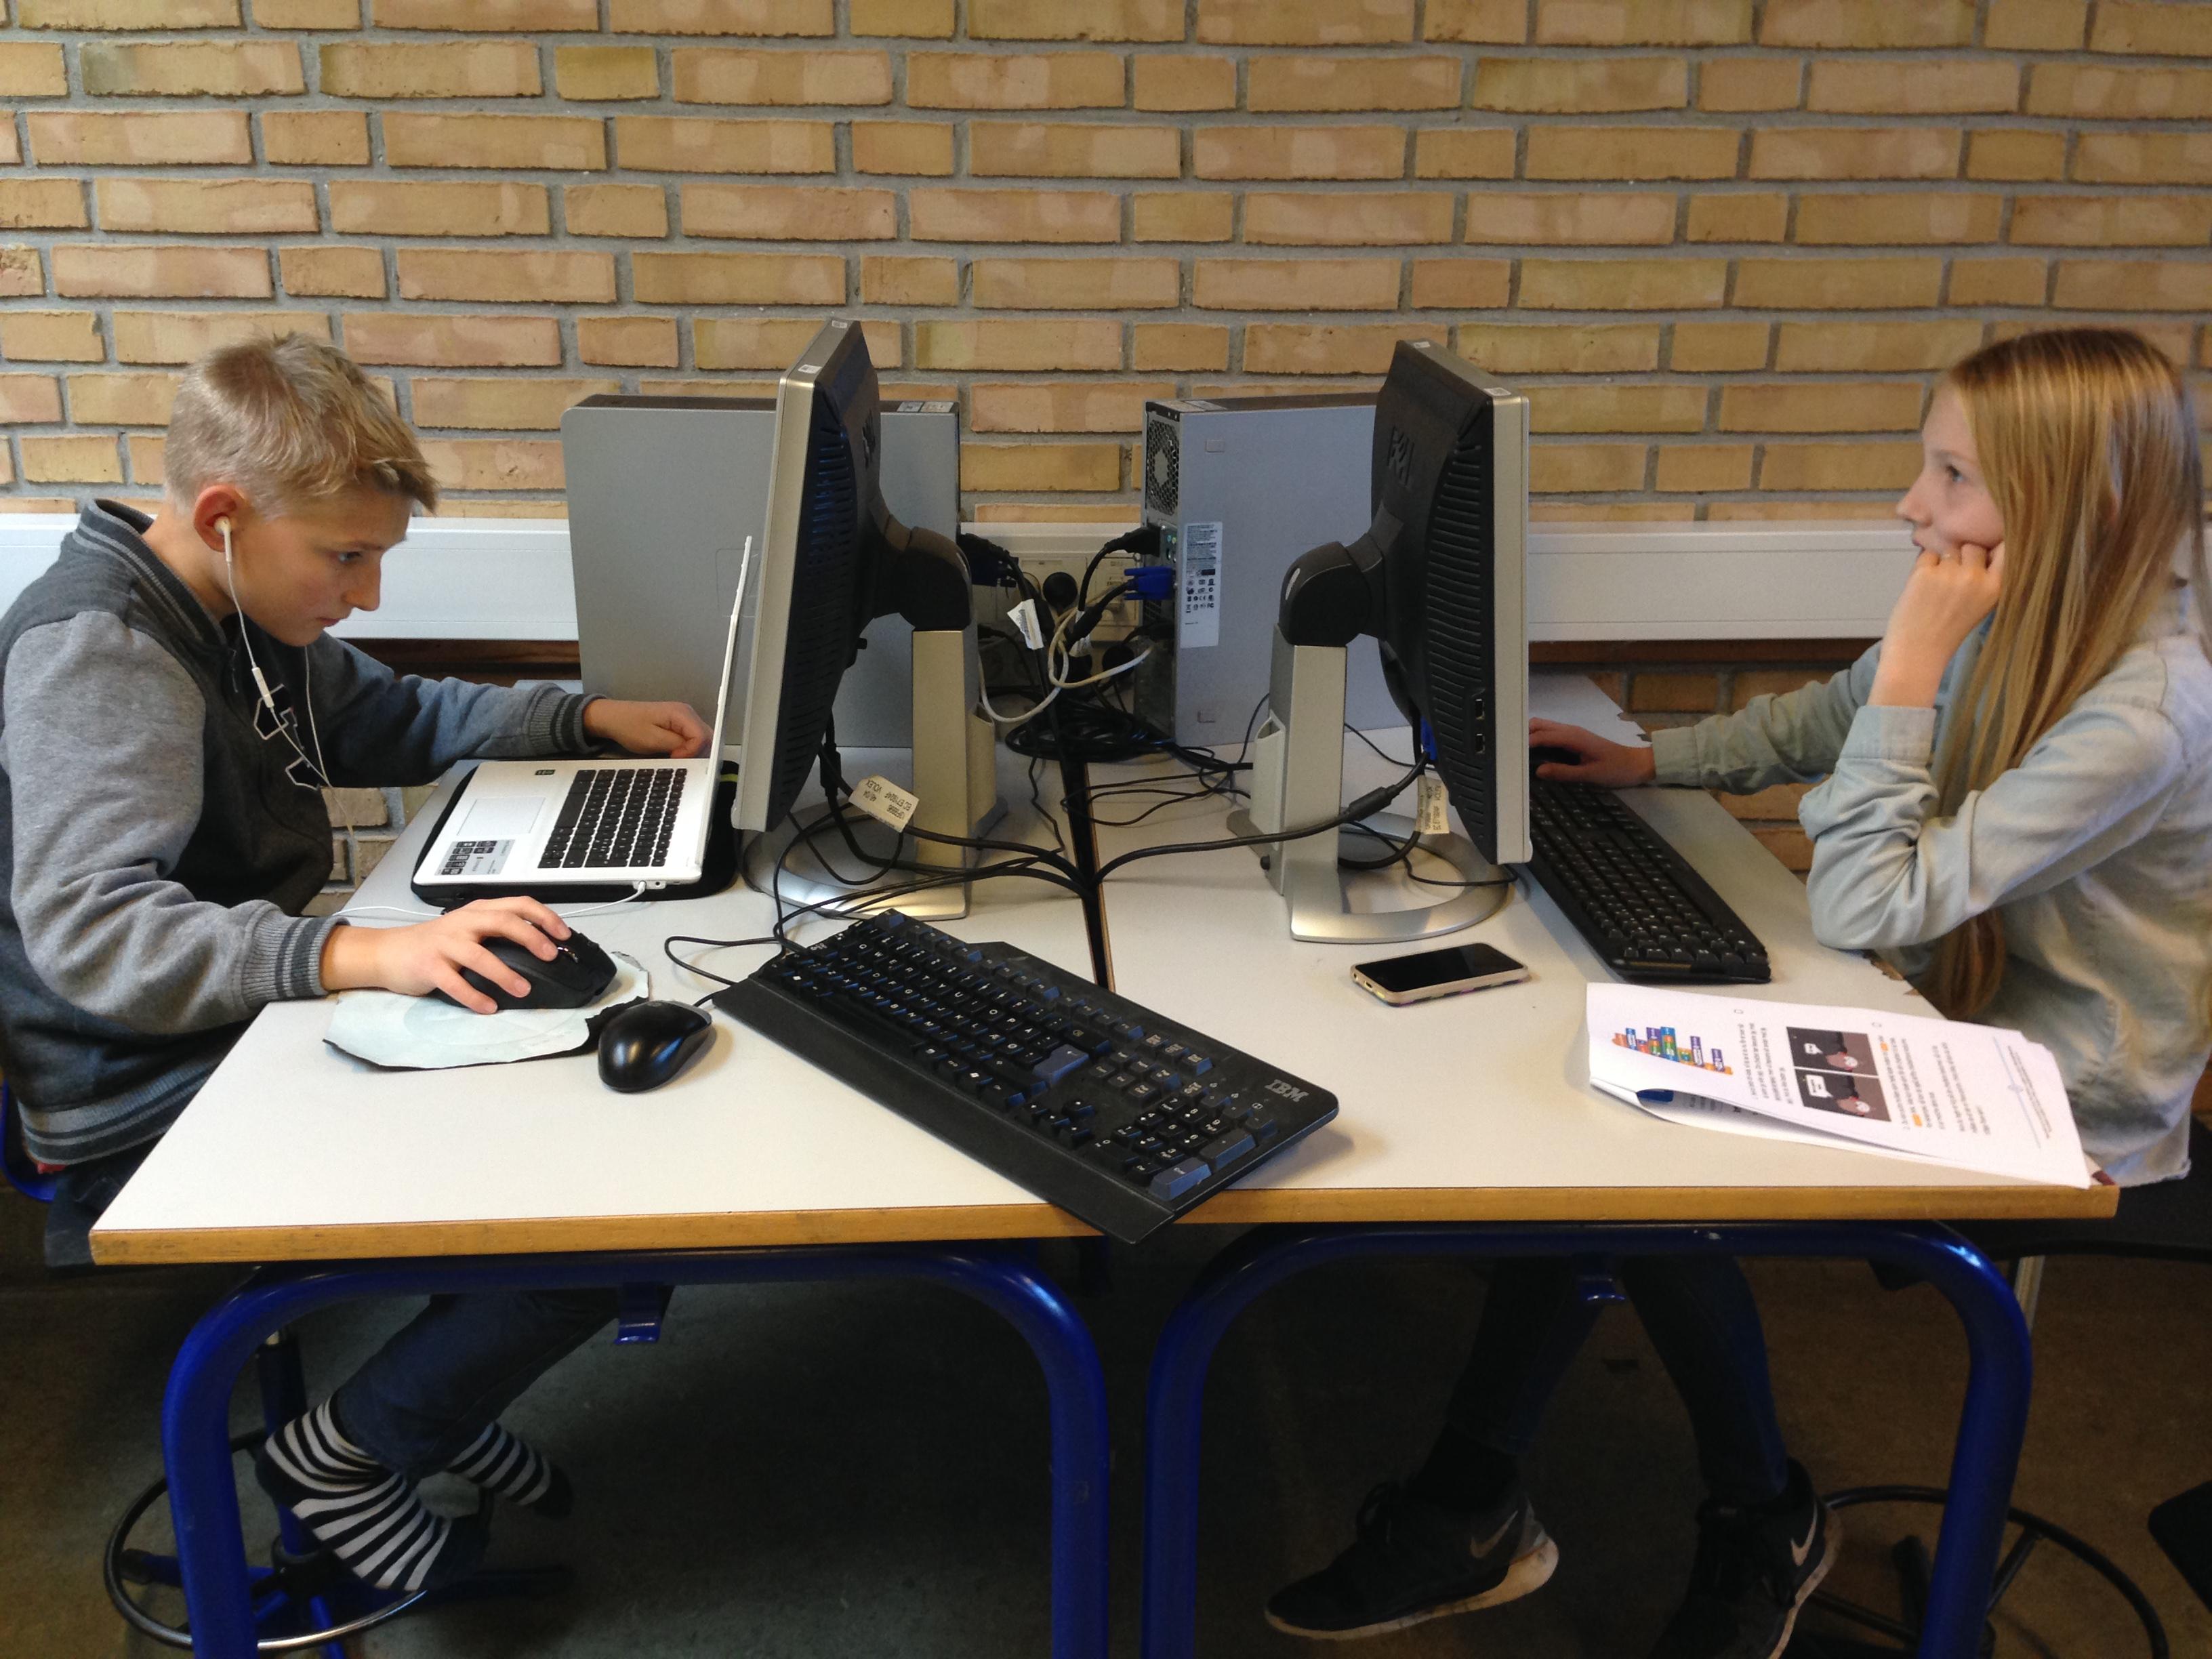 Code Club at the school of Beder